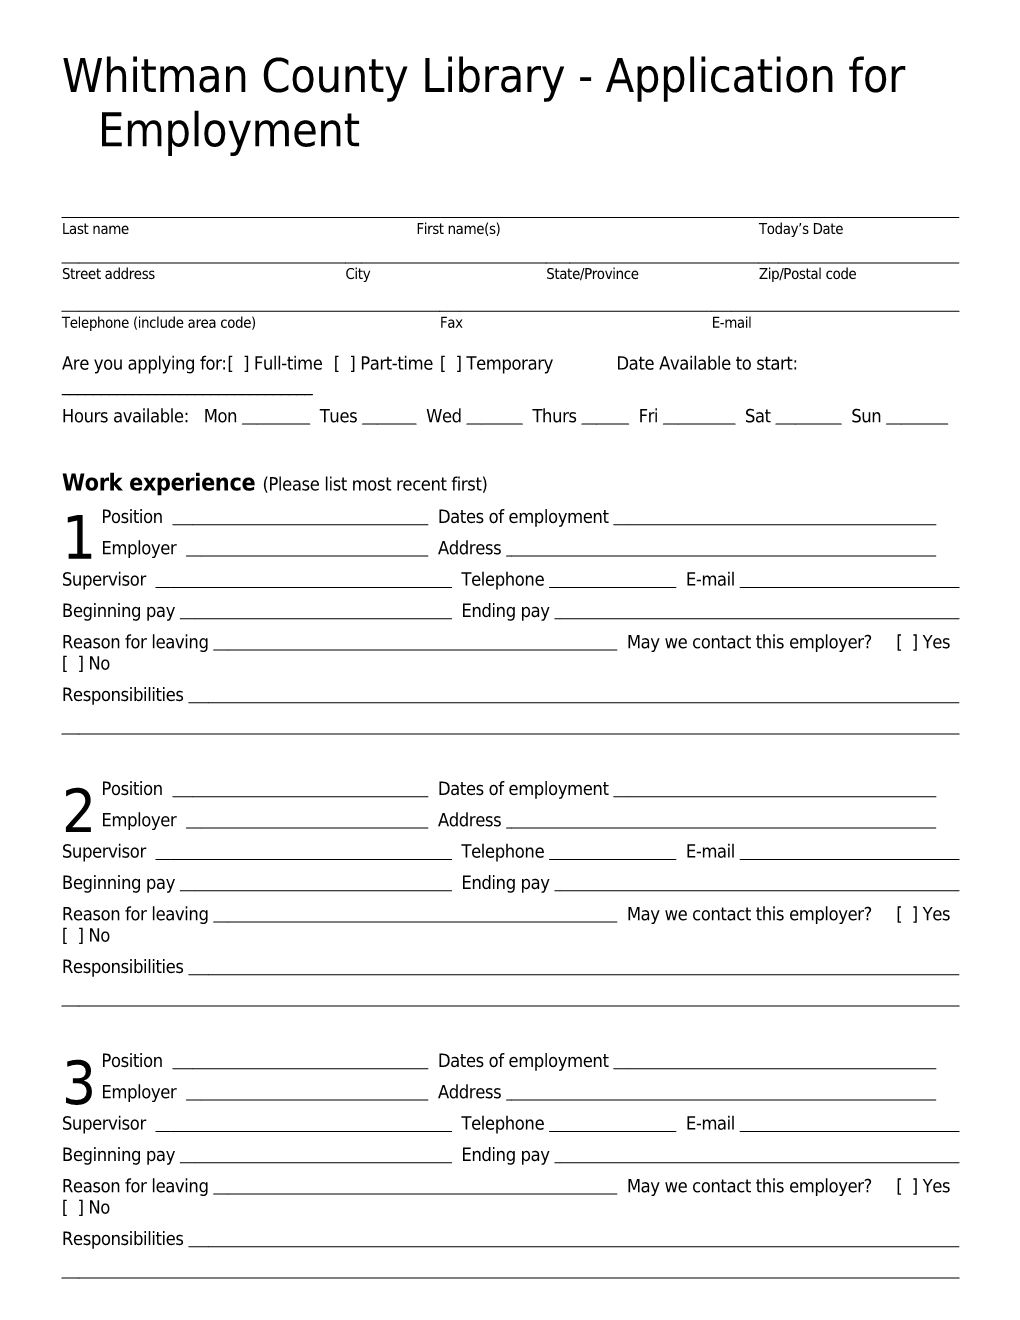 Whitman County Library - Application for Employment